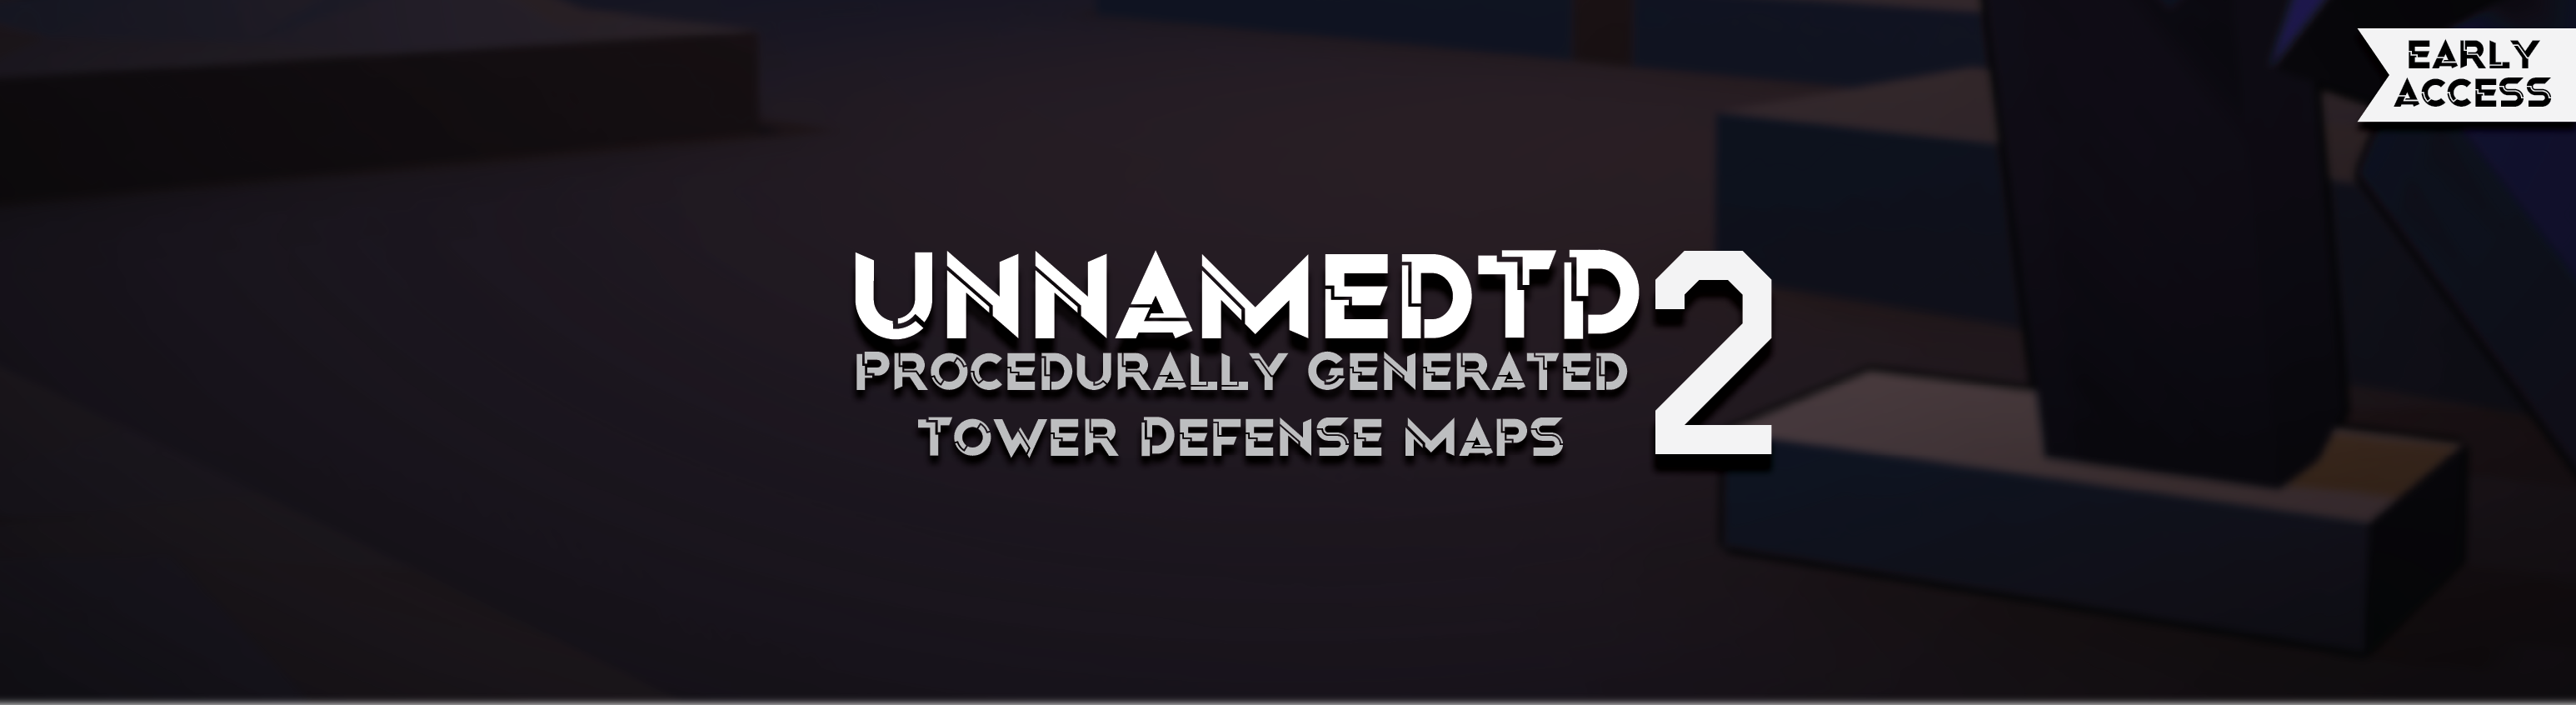 UnnamedTD 2 [Early Access]